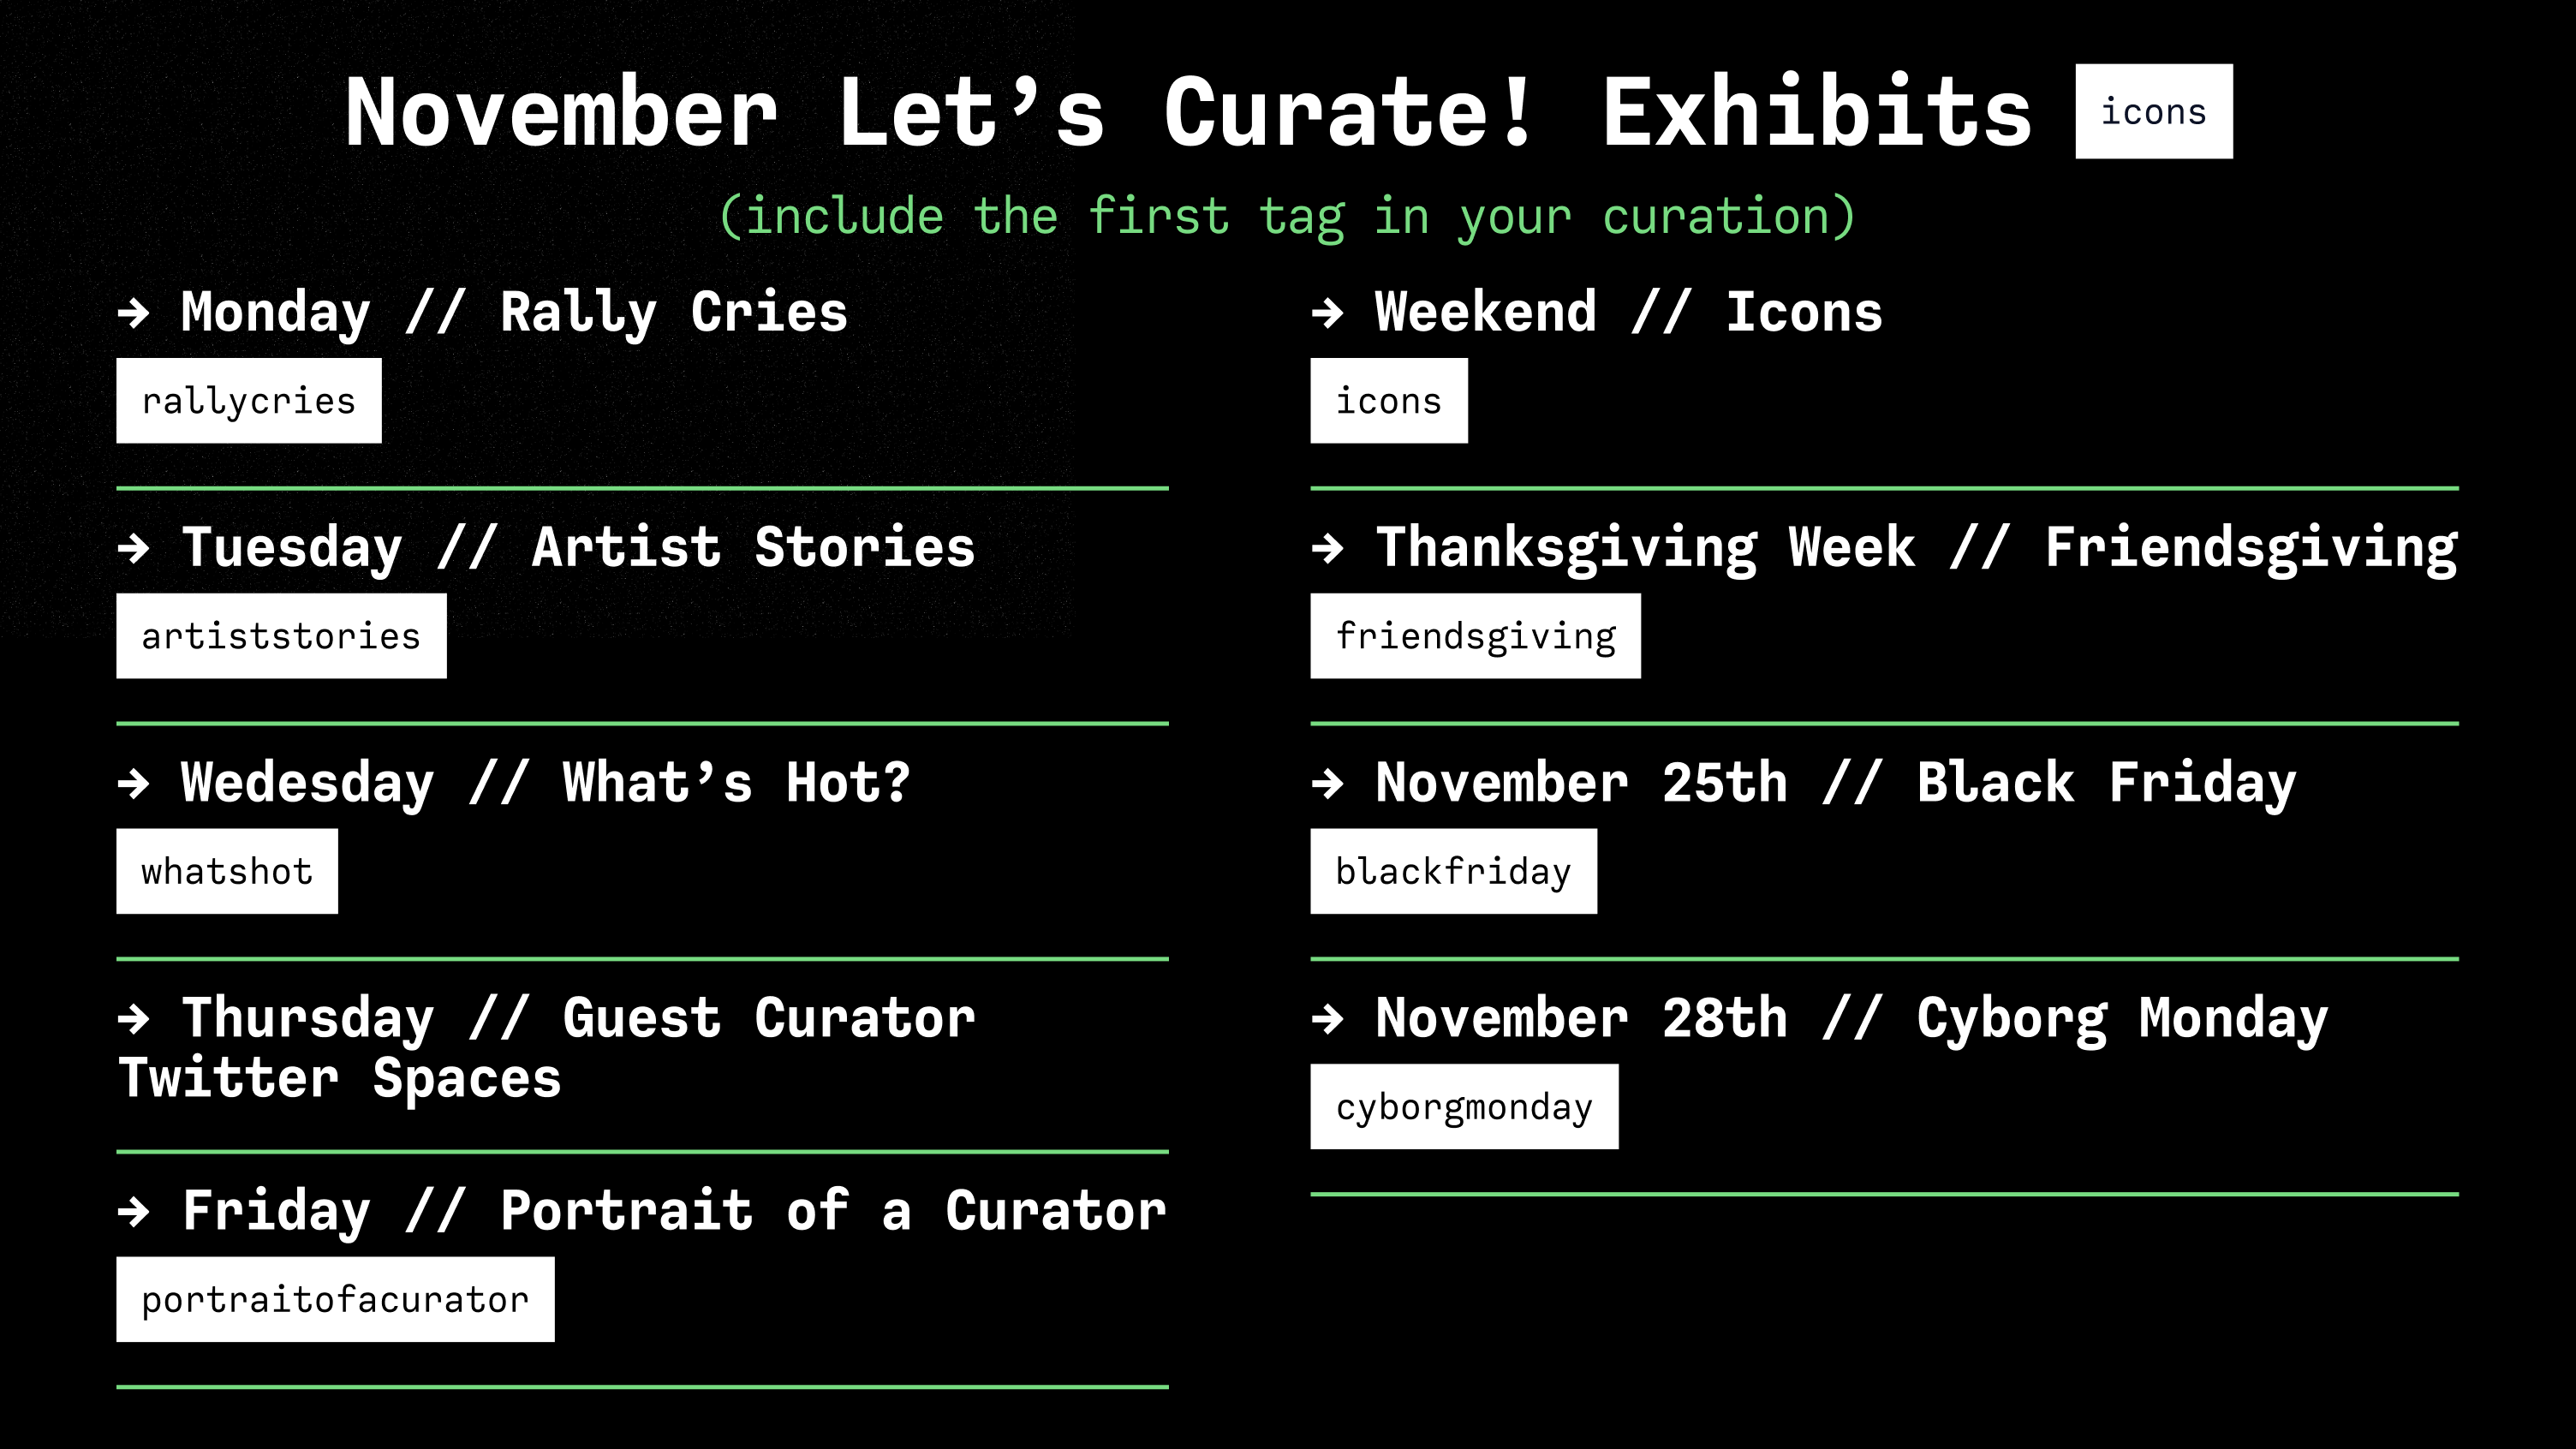 November's Let's Curate! Exhibits